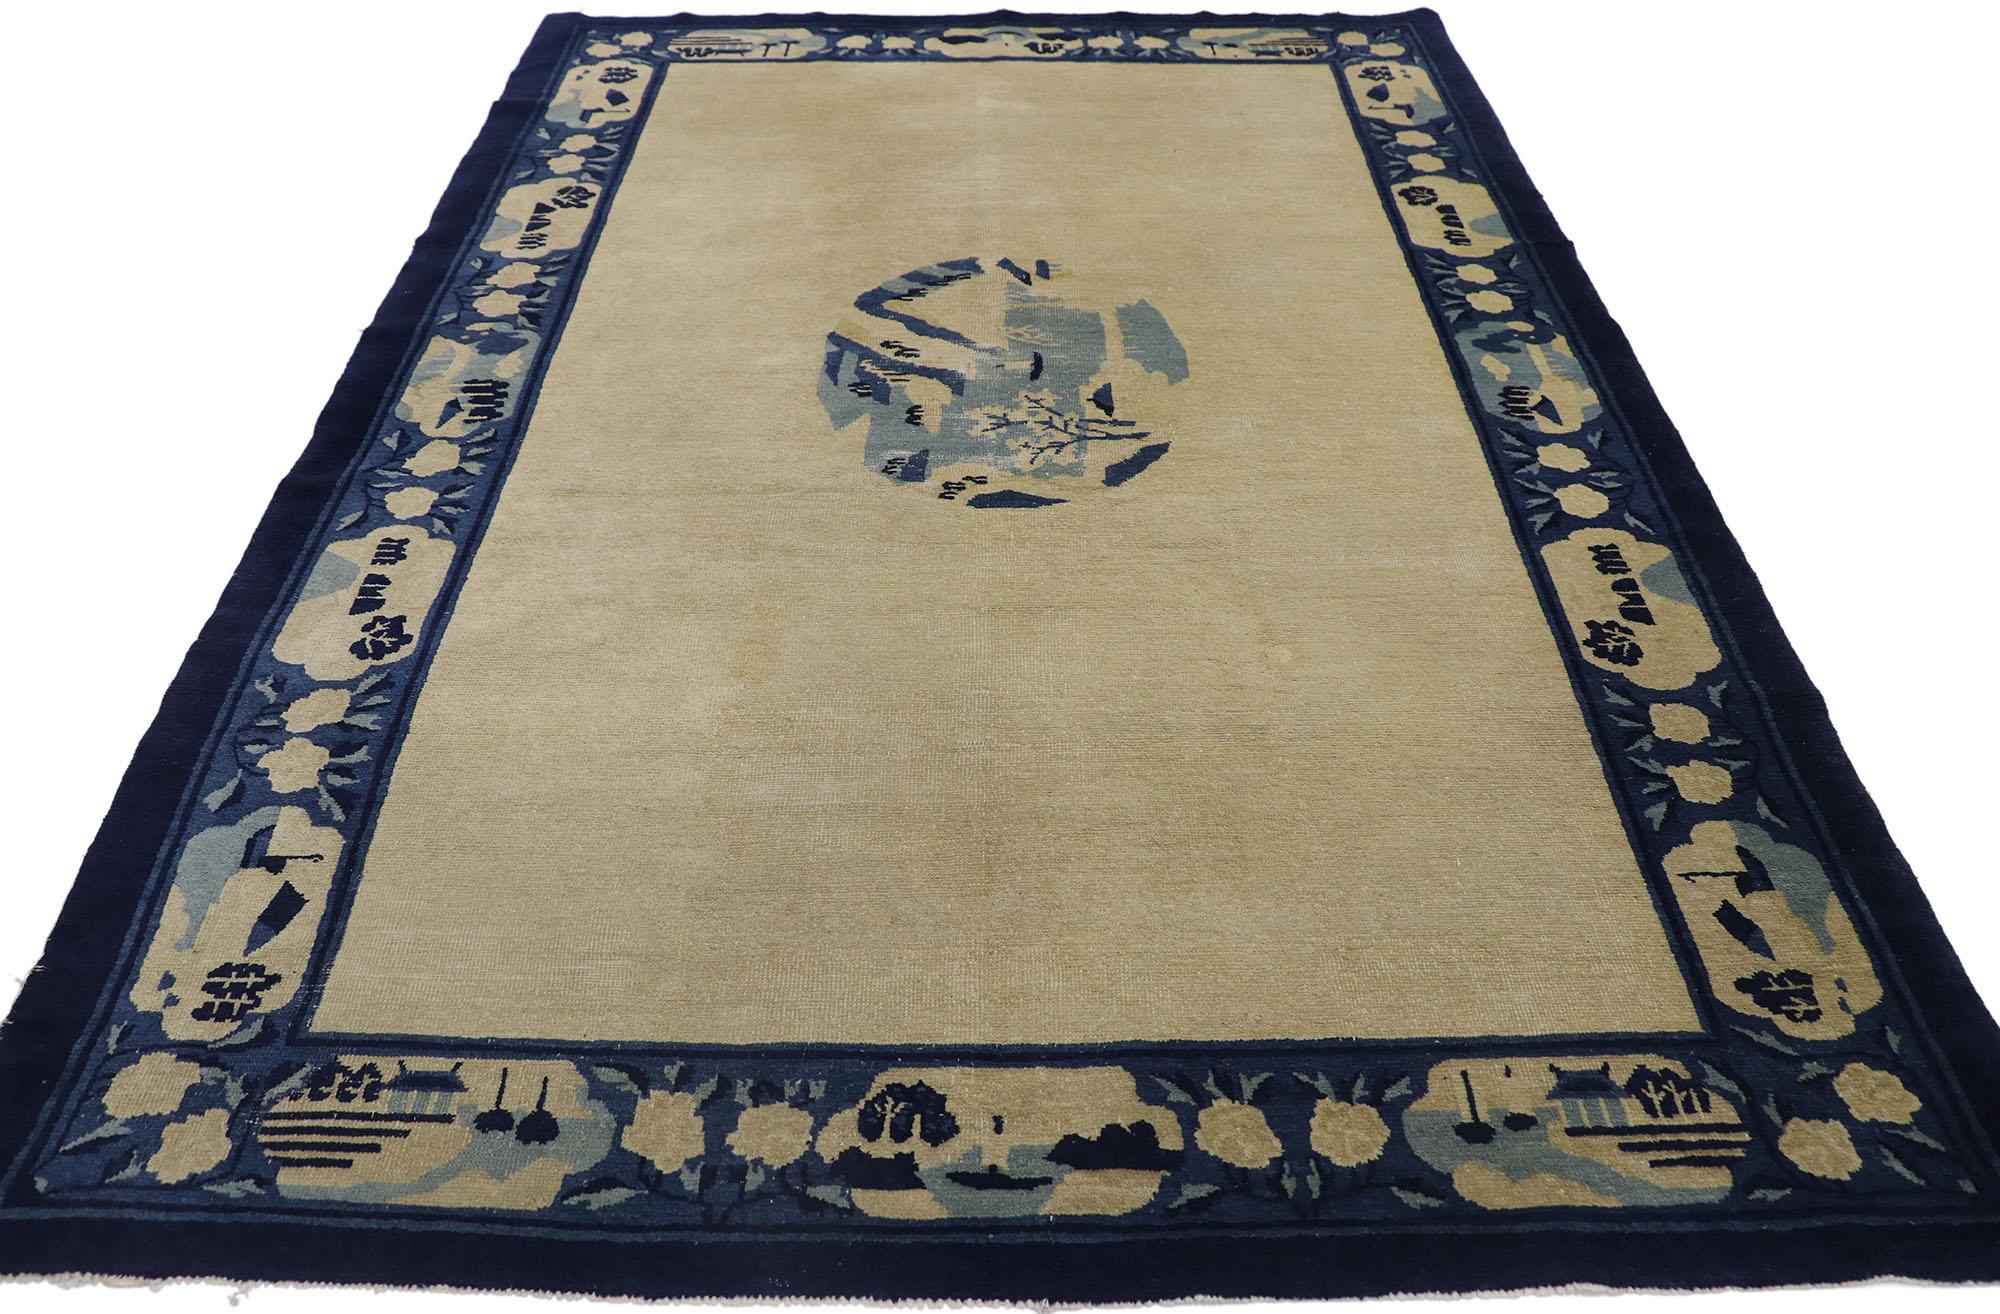 Chinoiserie Antique Chinese Peking Pictorial Rug with Cartouche Border For Sale